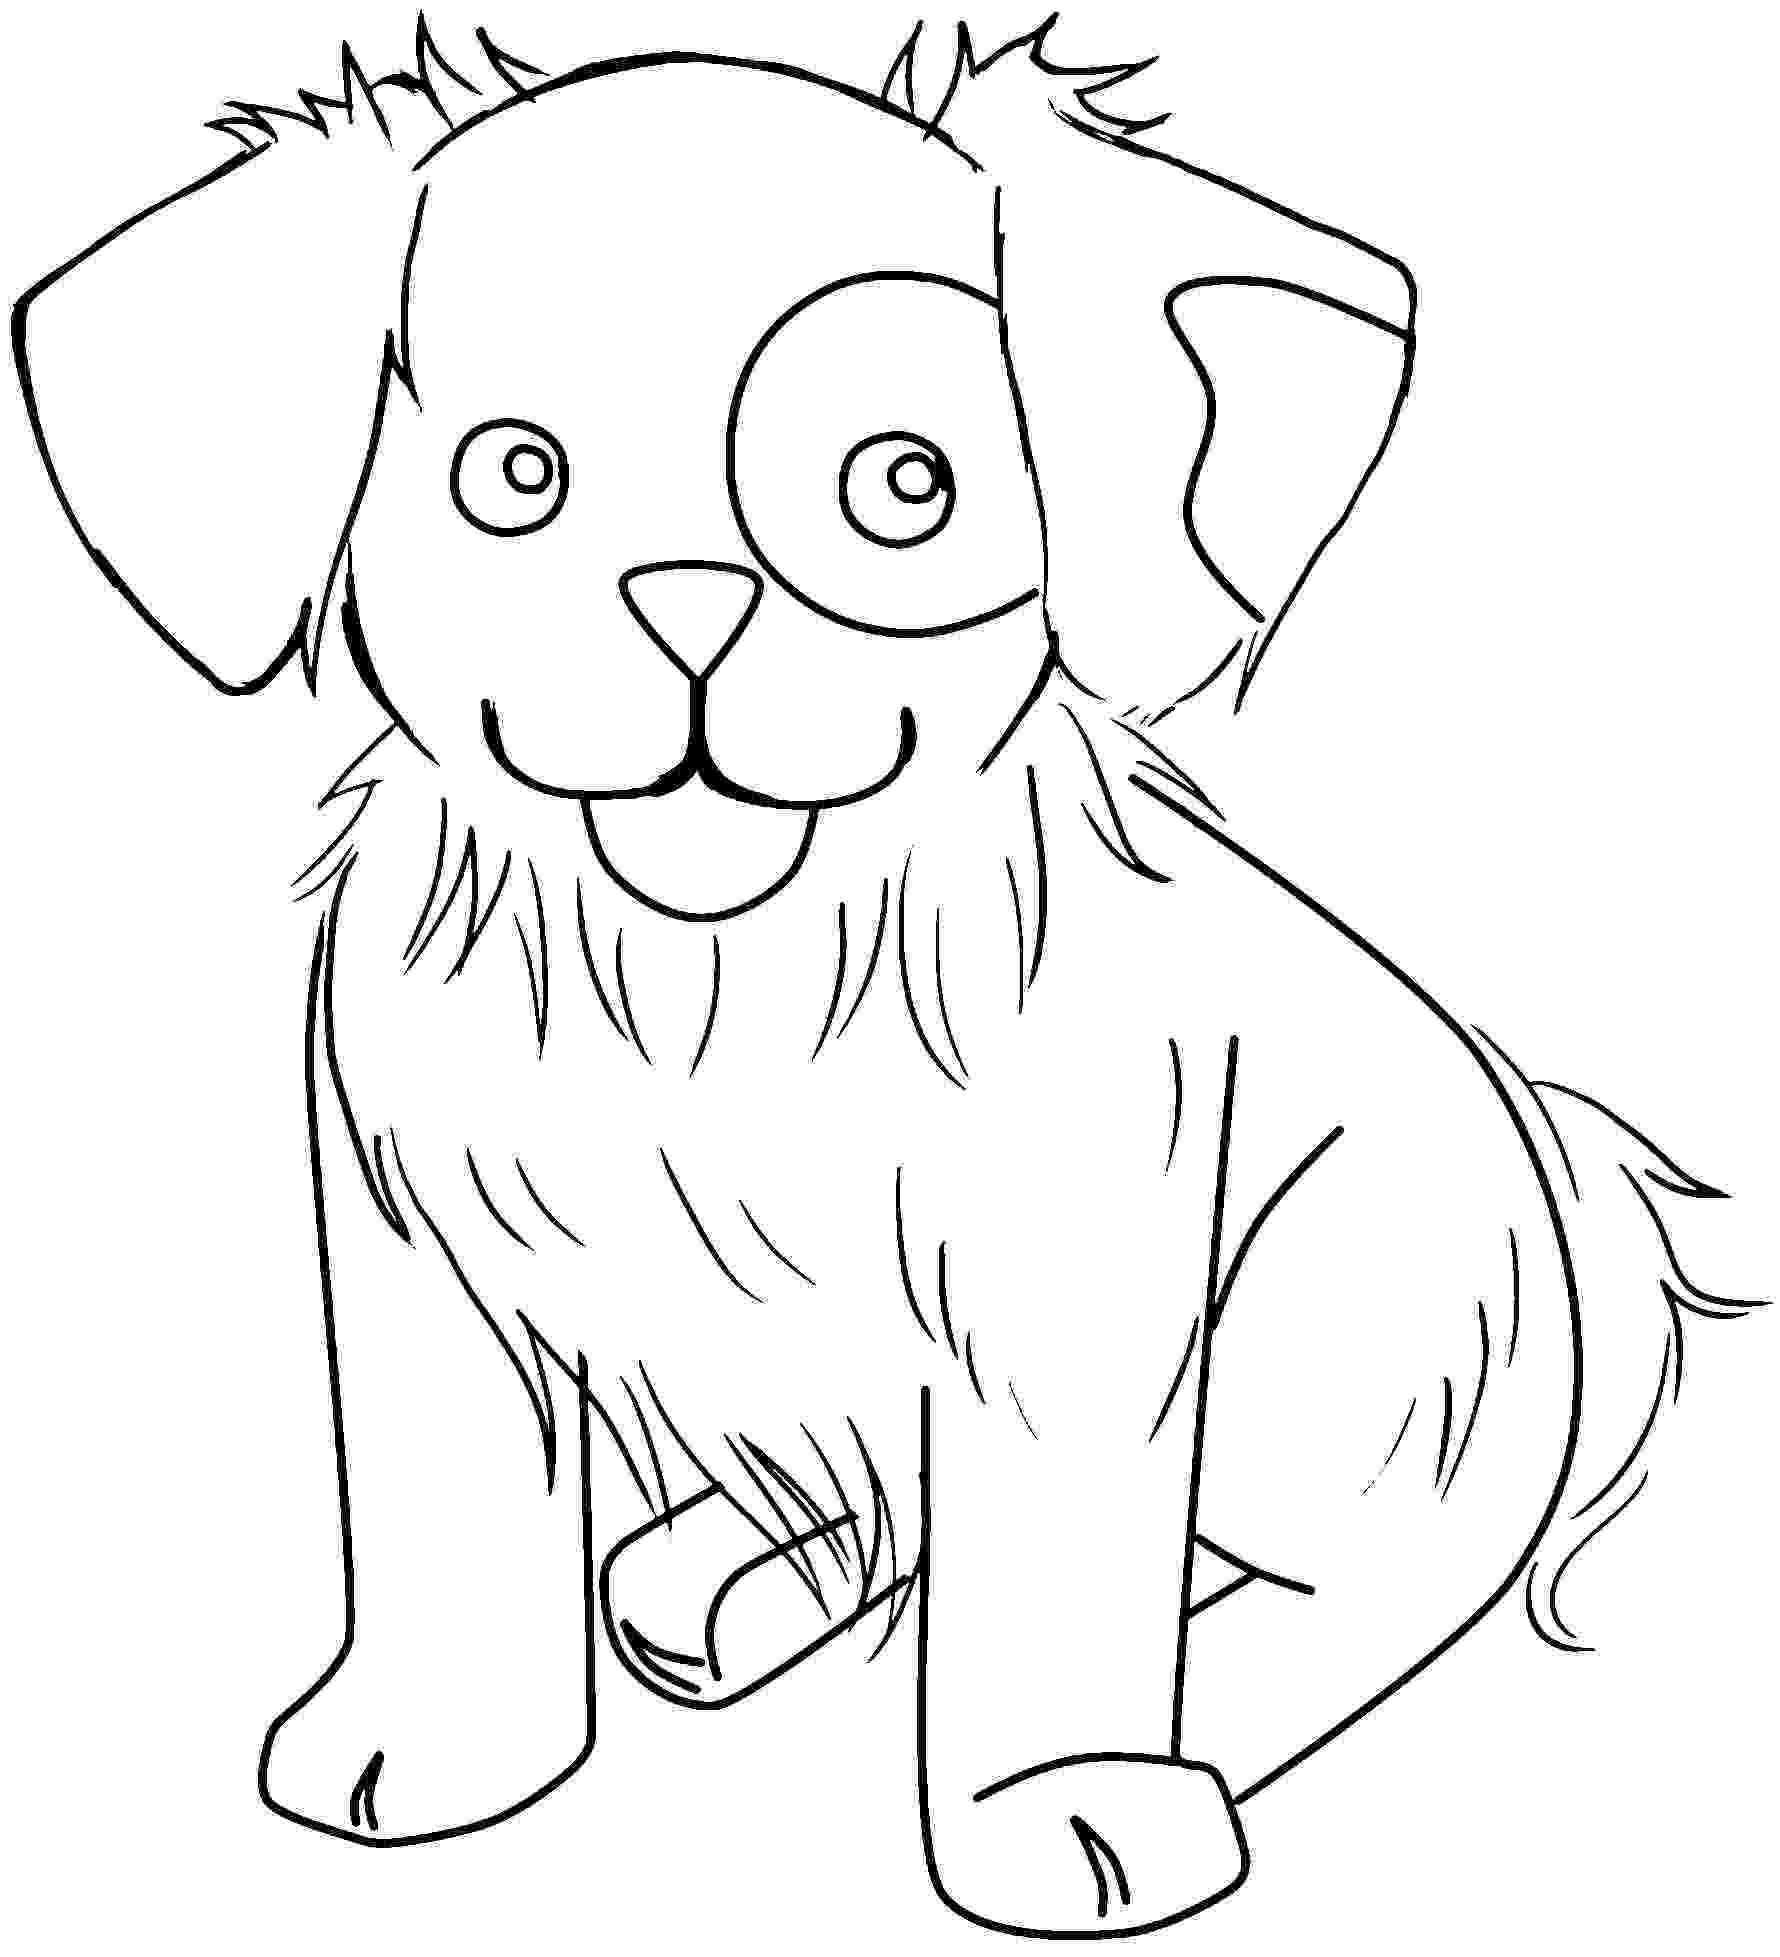 colouring pages animals to print free printable cute animal coloring pages coloring home pages print colouring to animals 